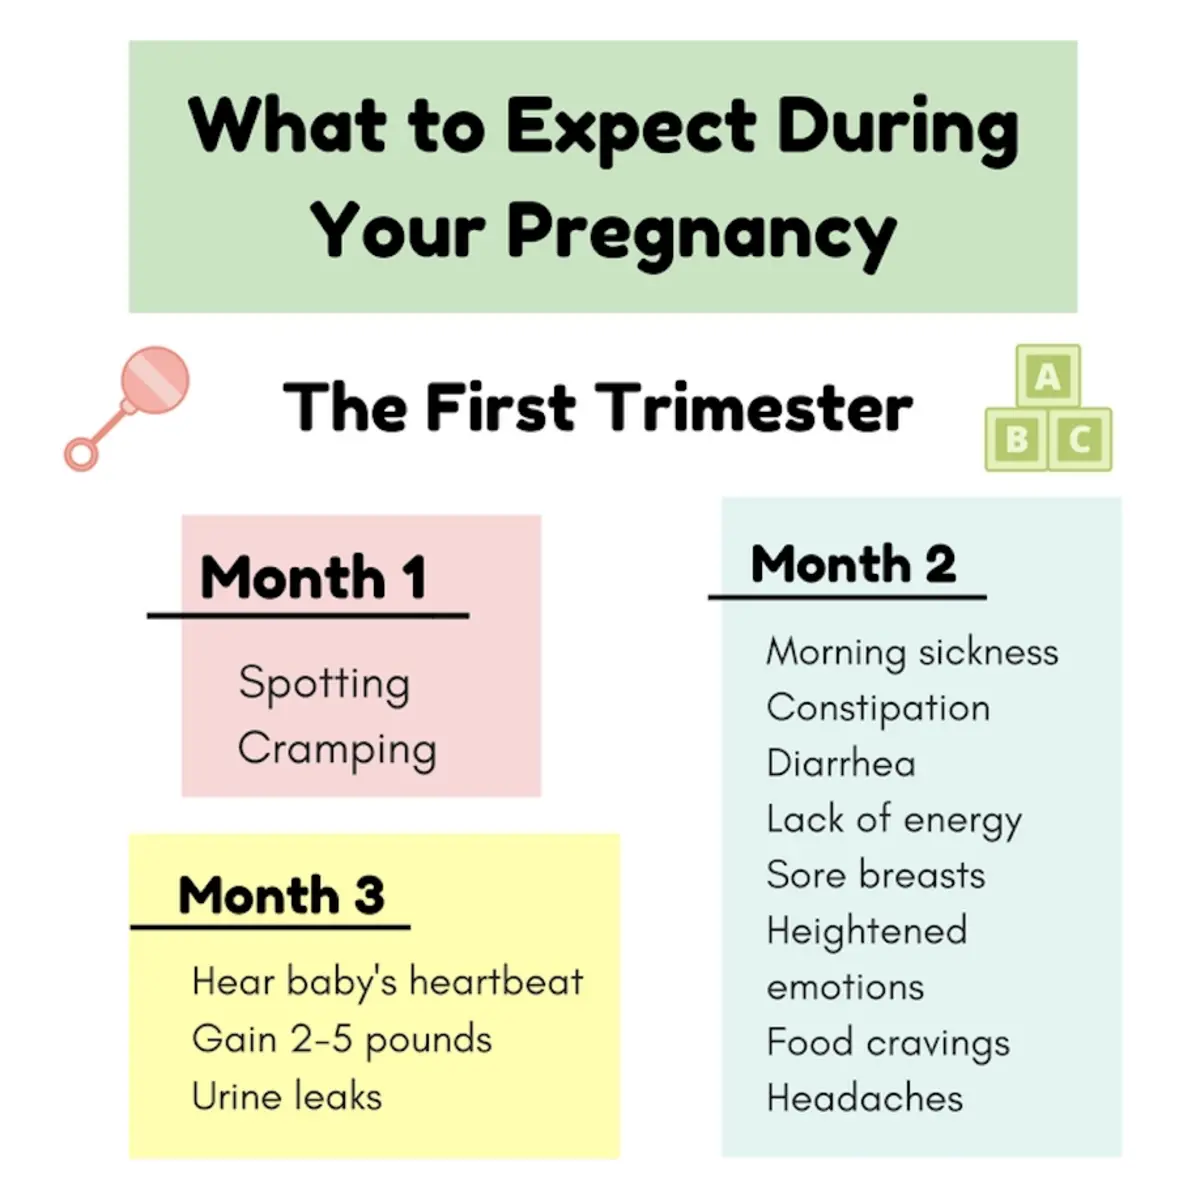 How Far Along Am I in My Pregnancy?: Your Week